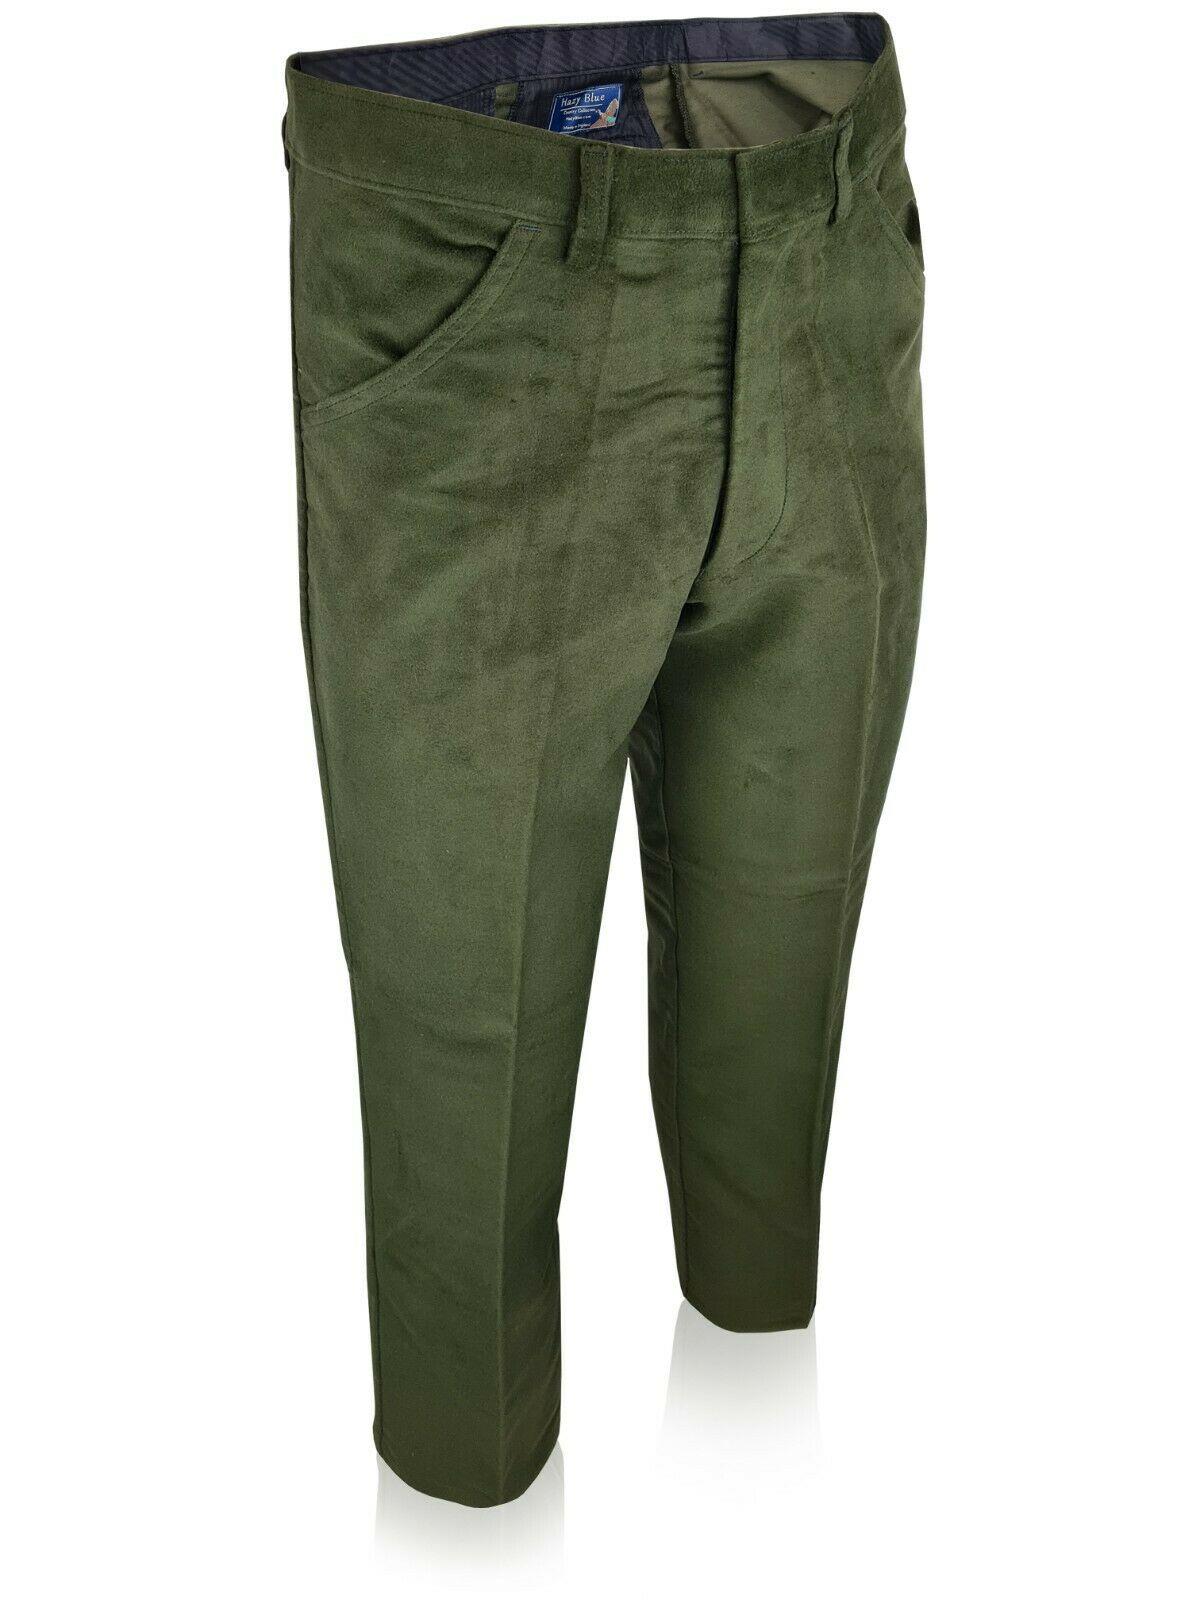 O'Connell's pleated front cotton Moleskin Trouser - Olive - Men's Clothing,  Traditional Natural shouldered clothing, preppy apparel